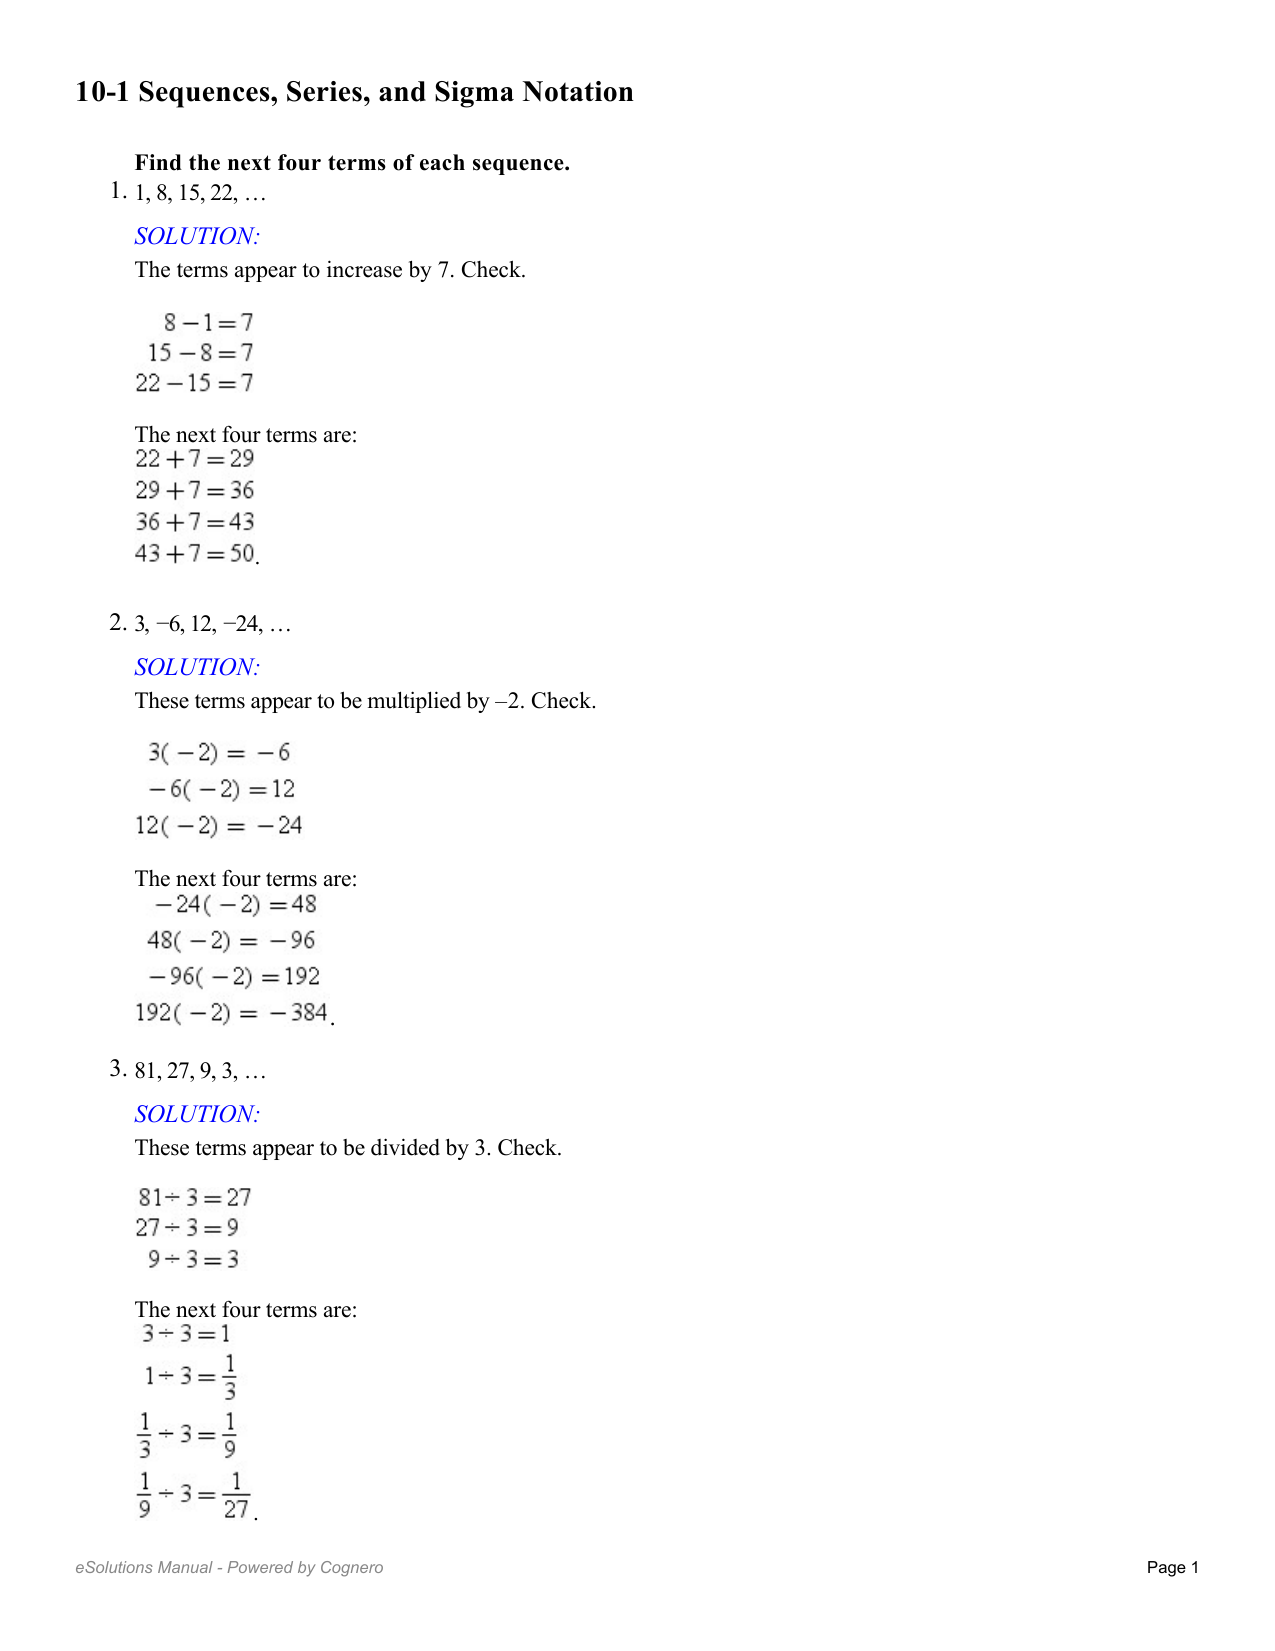 27-27 Sequences, Series, and Sigma Notation